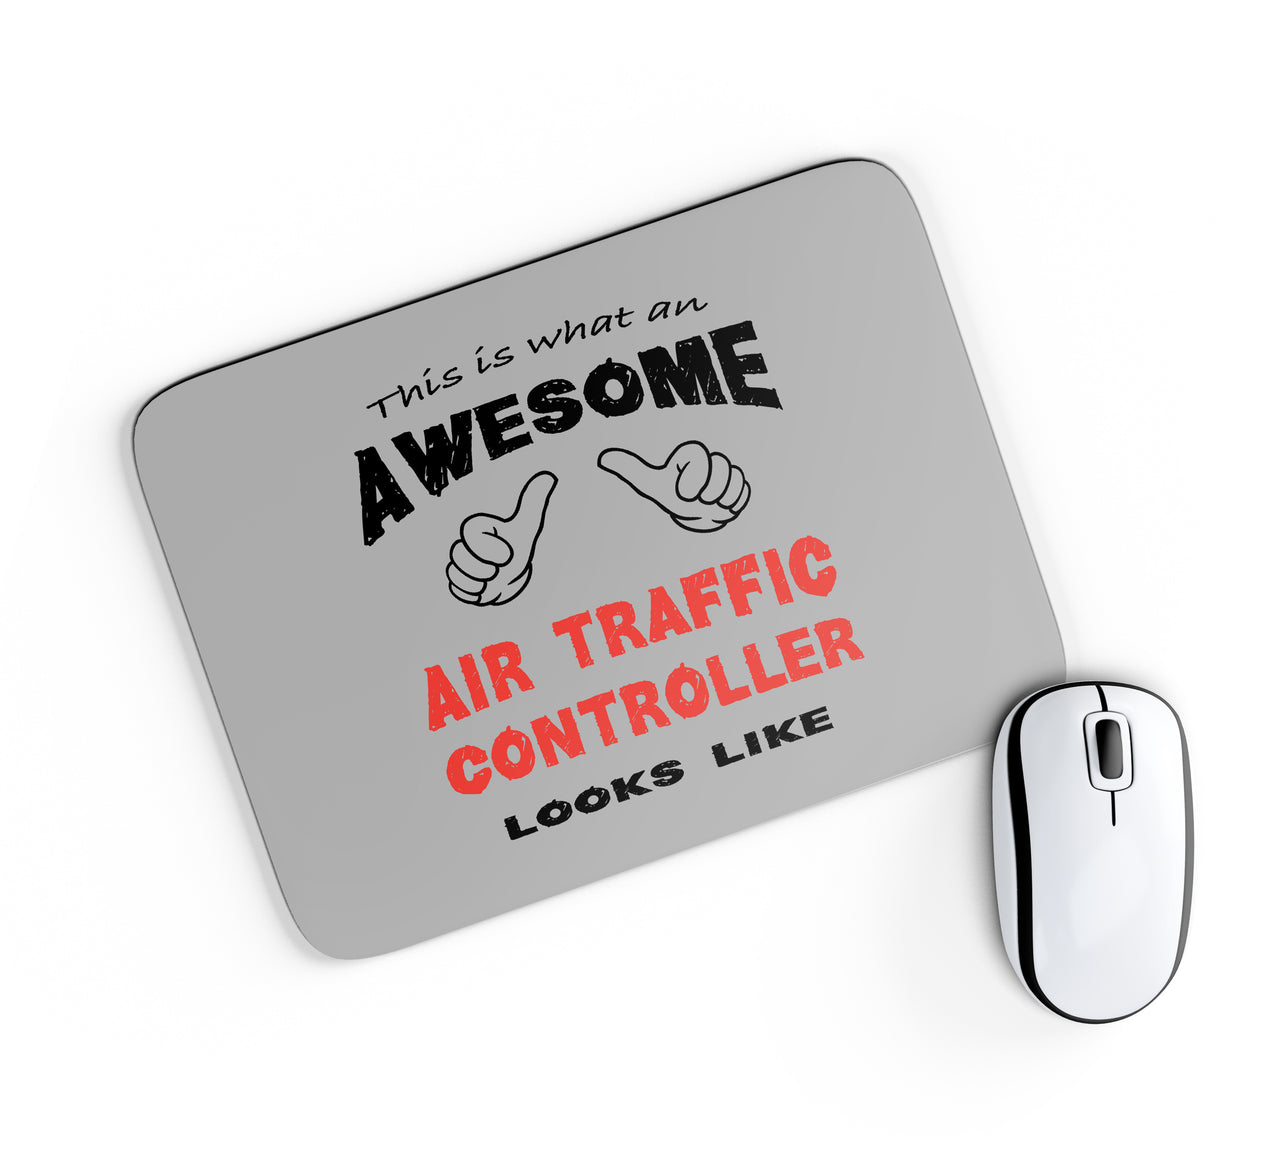 Air Traffic Controller Designed Mouse Pads